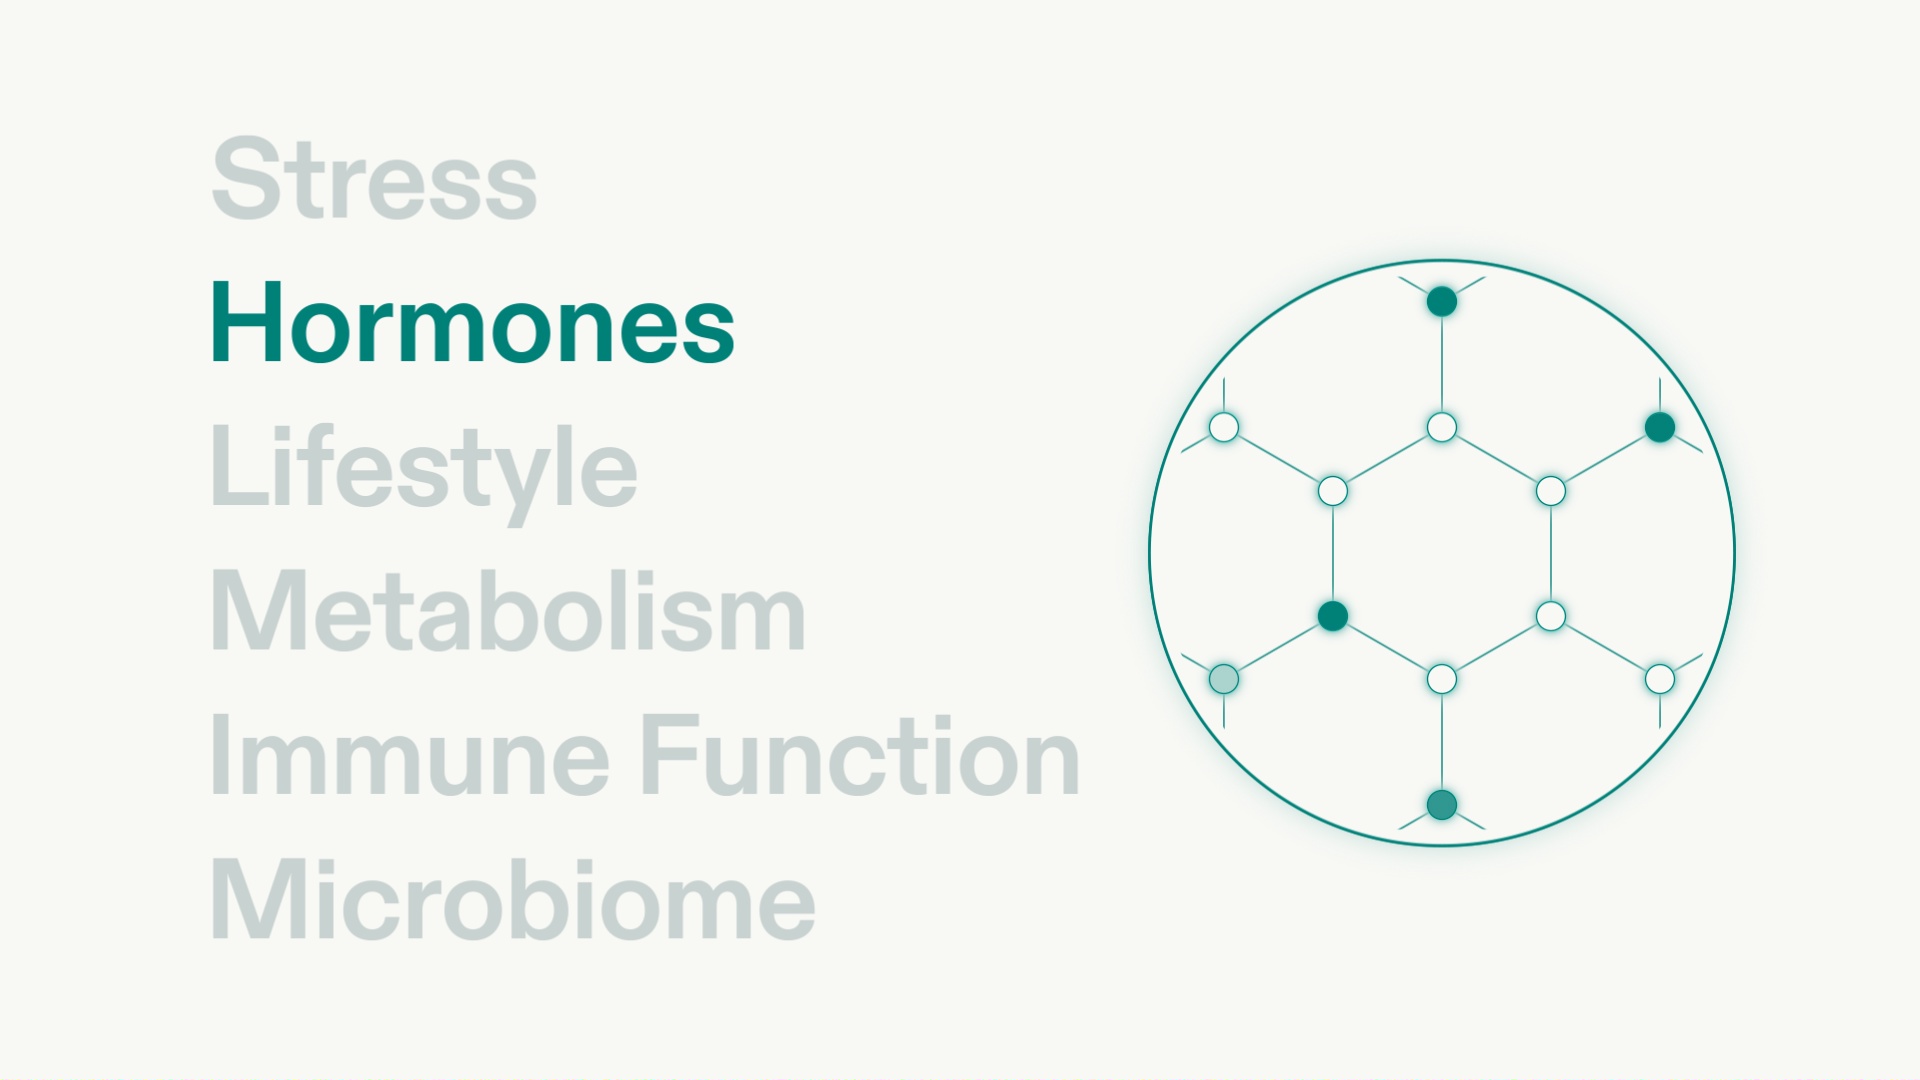 Graphic illustration highlighting key health factors: Stress, Hormones, Lifestyle, Metabolism, Immune Function, and Microbiome, with a circular molecular structure diagram on the right, in a teal and white color scheme.